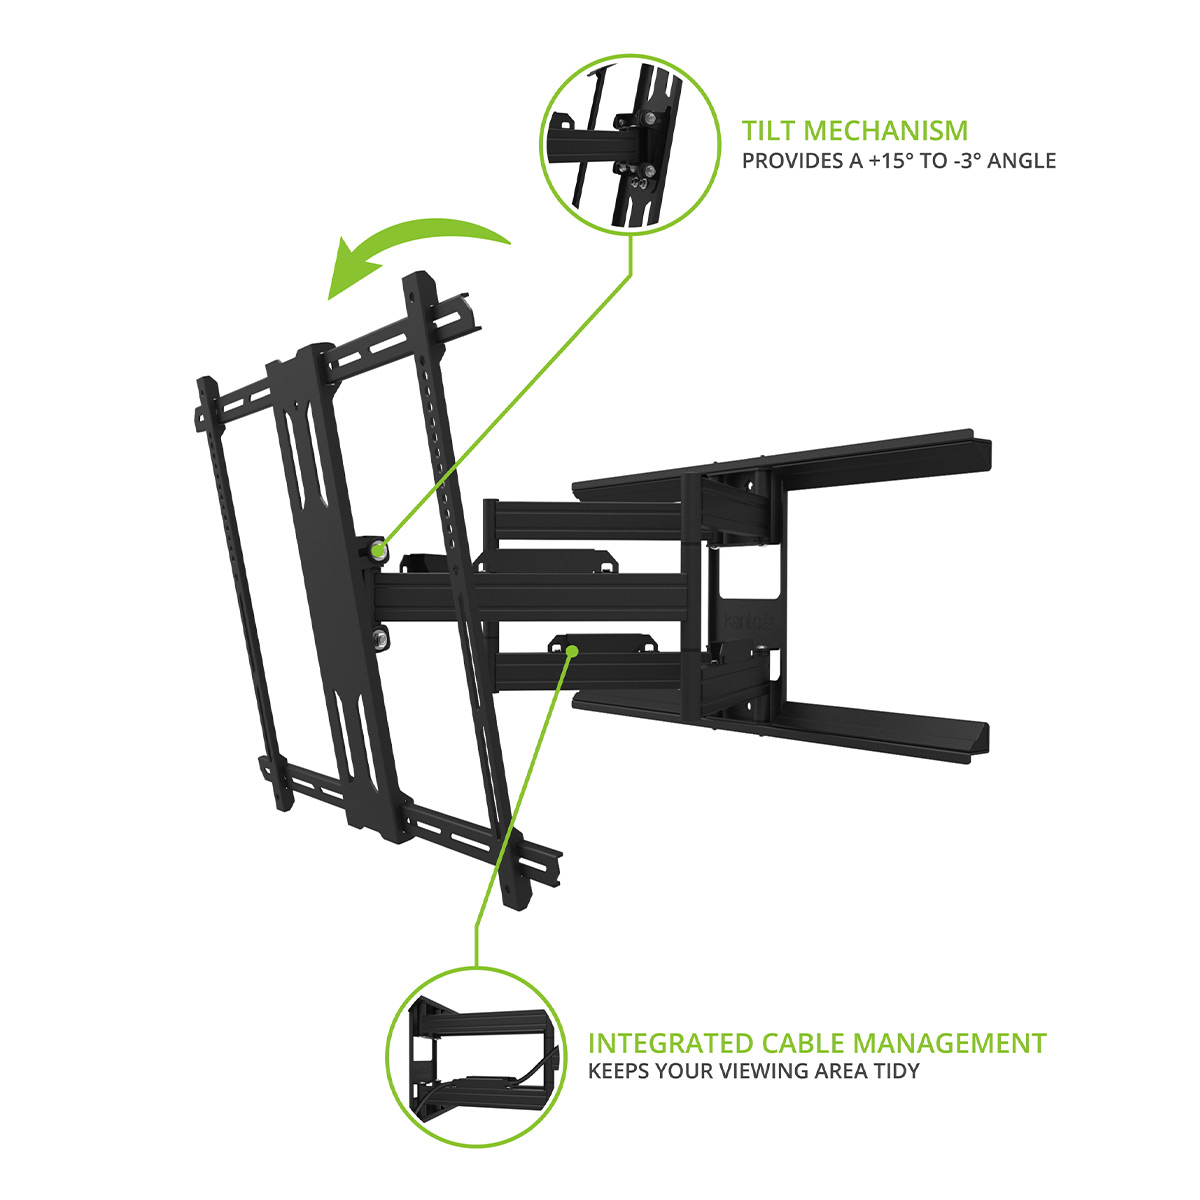 Kanto PDX700G Articulating Full Motion Outdoor Galvanized TV Mount for 42" - 100" TV - image 3 of 8